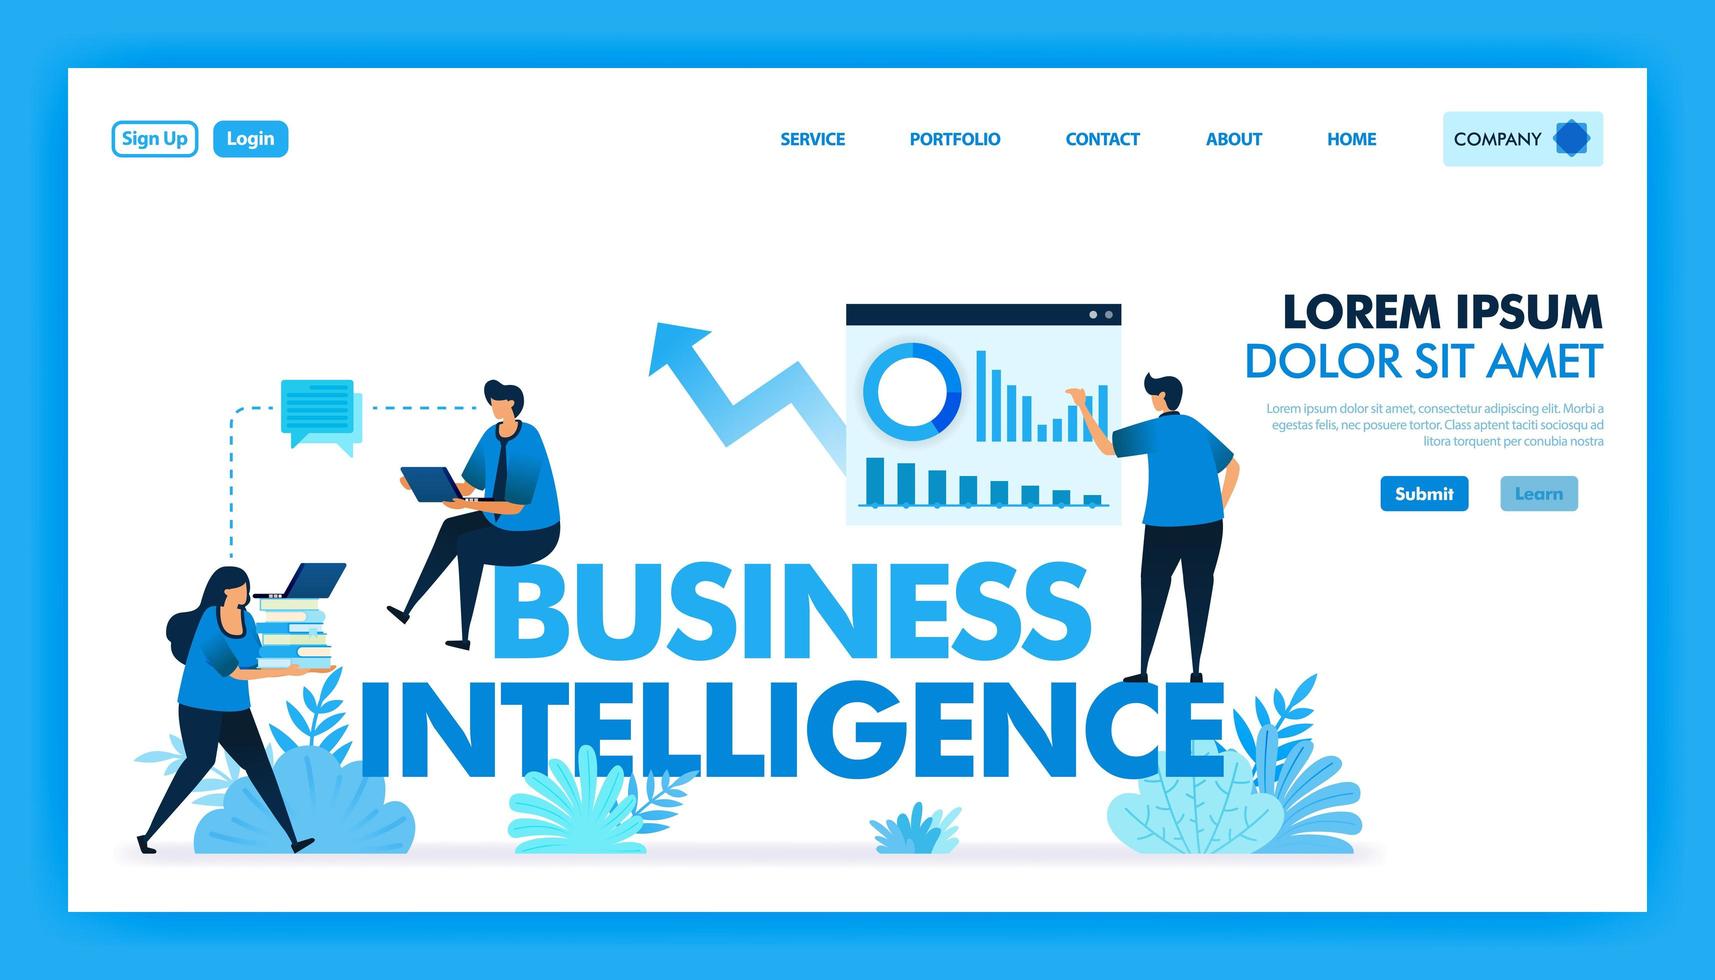 BI or business intelligence to facilitate companies, Business and technology industry 4.0 with access to data analysis, planner strategy, IOT, artificial intelligence. Flat illustration vector design.